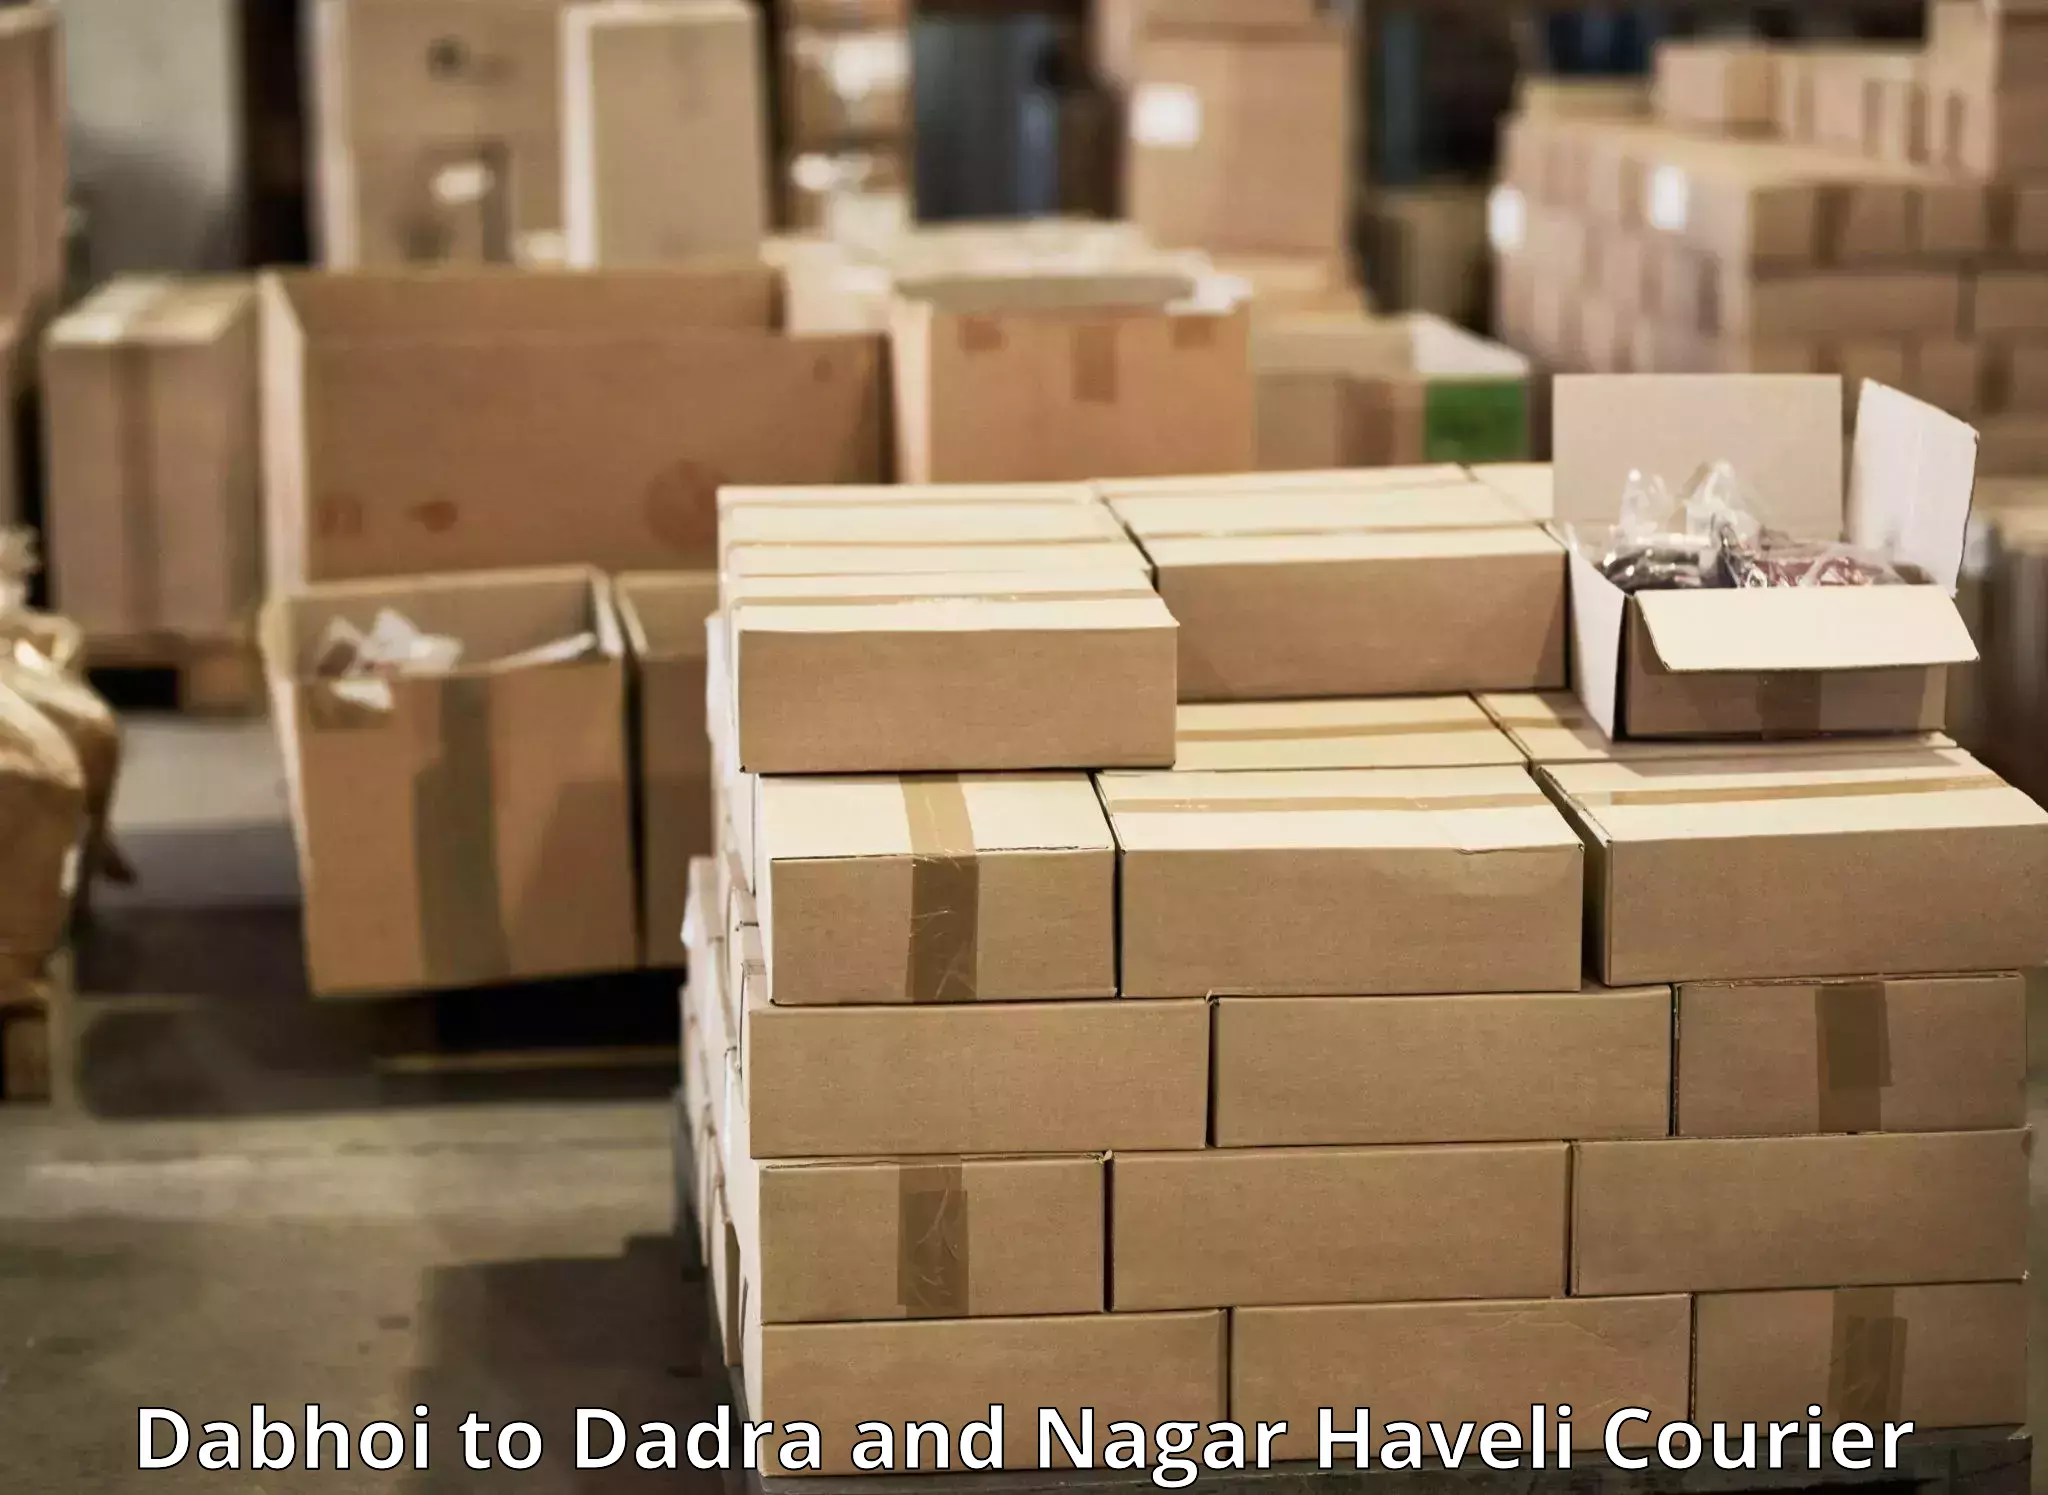 Express delivery capabilities Dabhoi to Dadra and Nagar Haveli